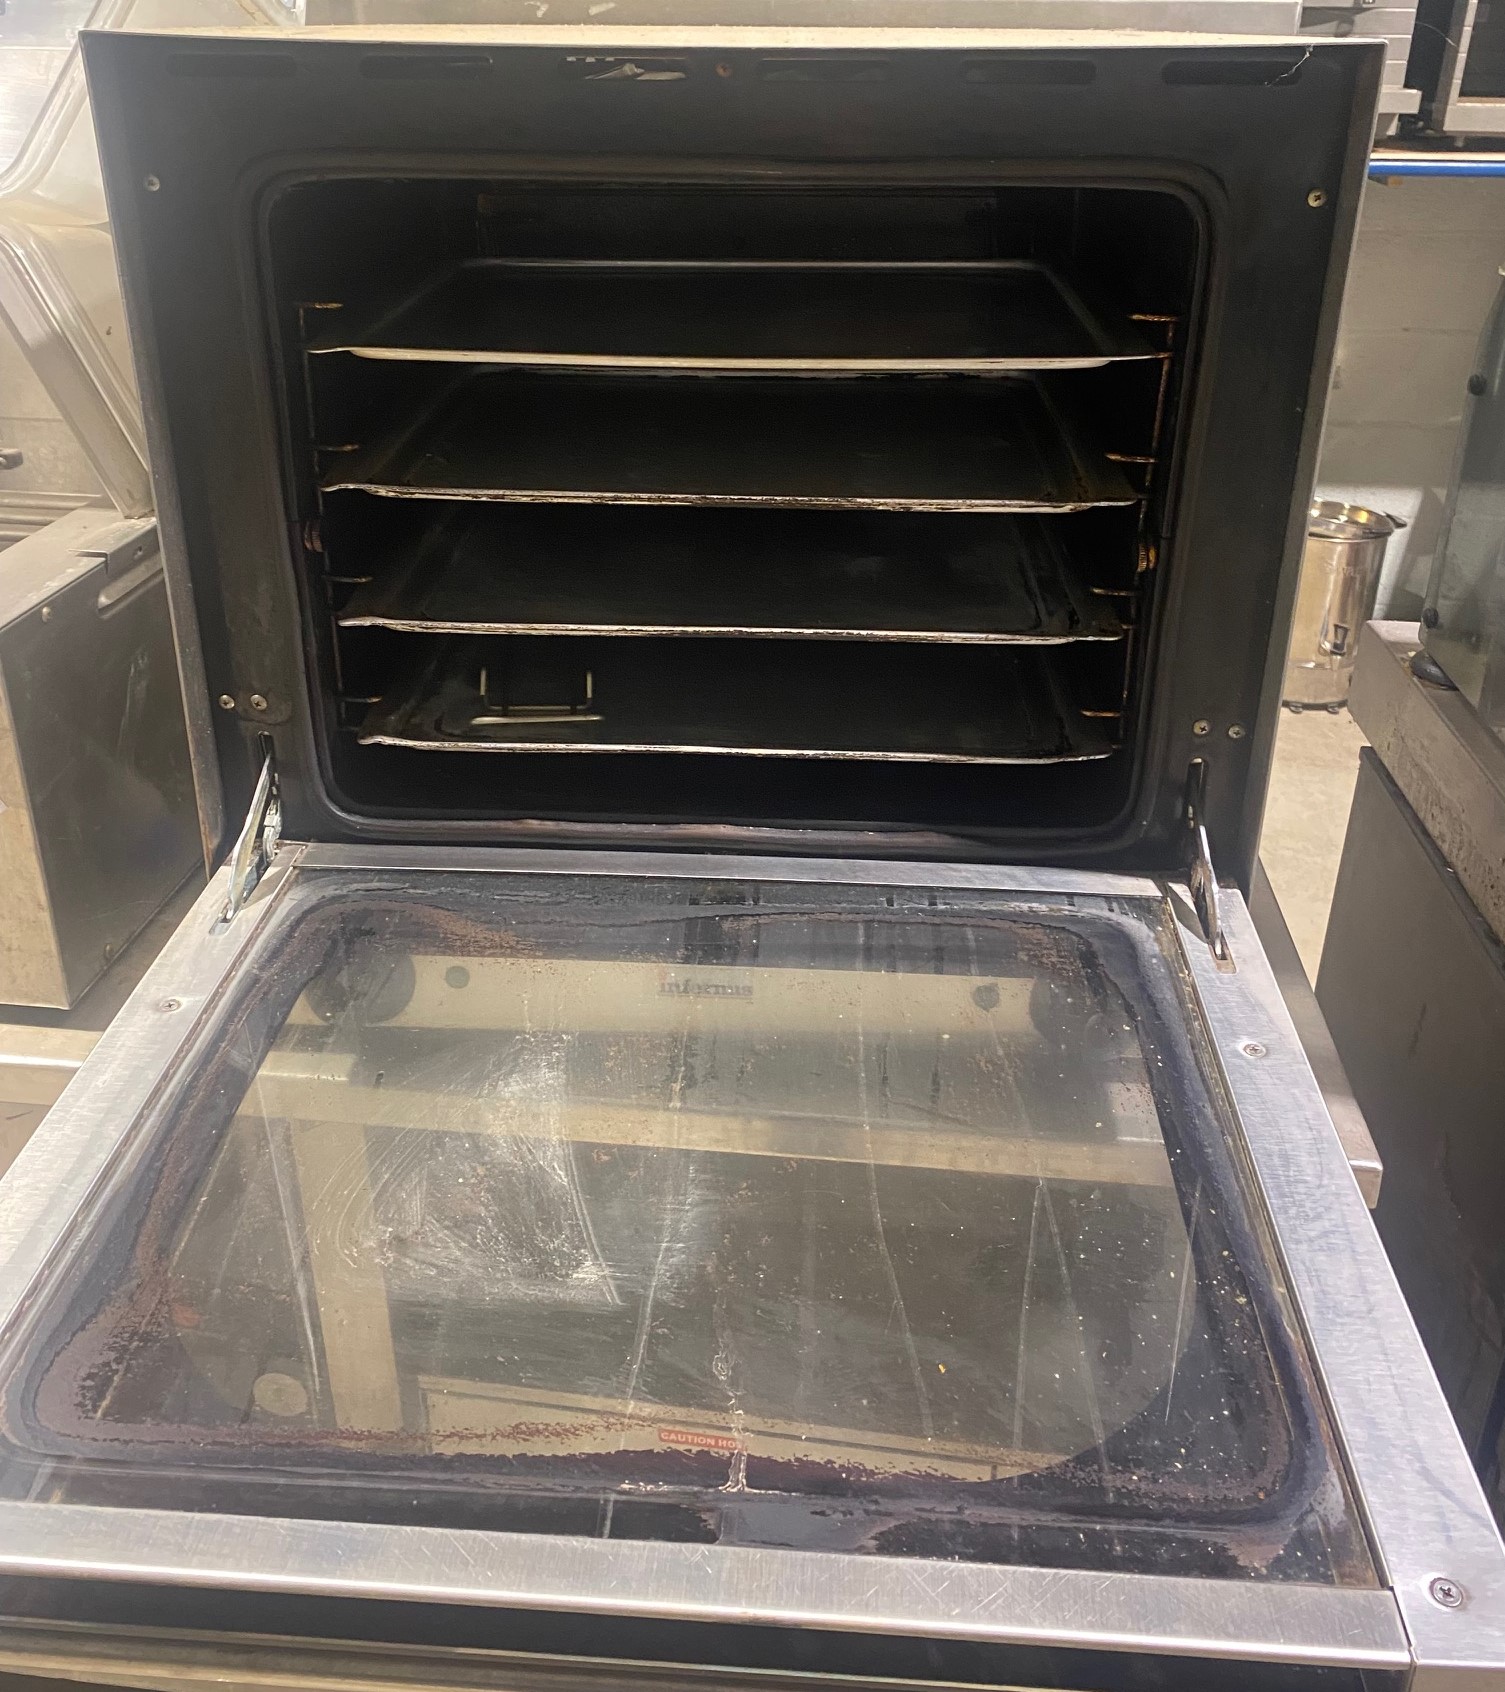 INFERNUS Table Top Convection Oven